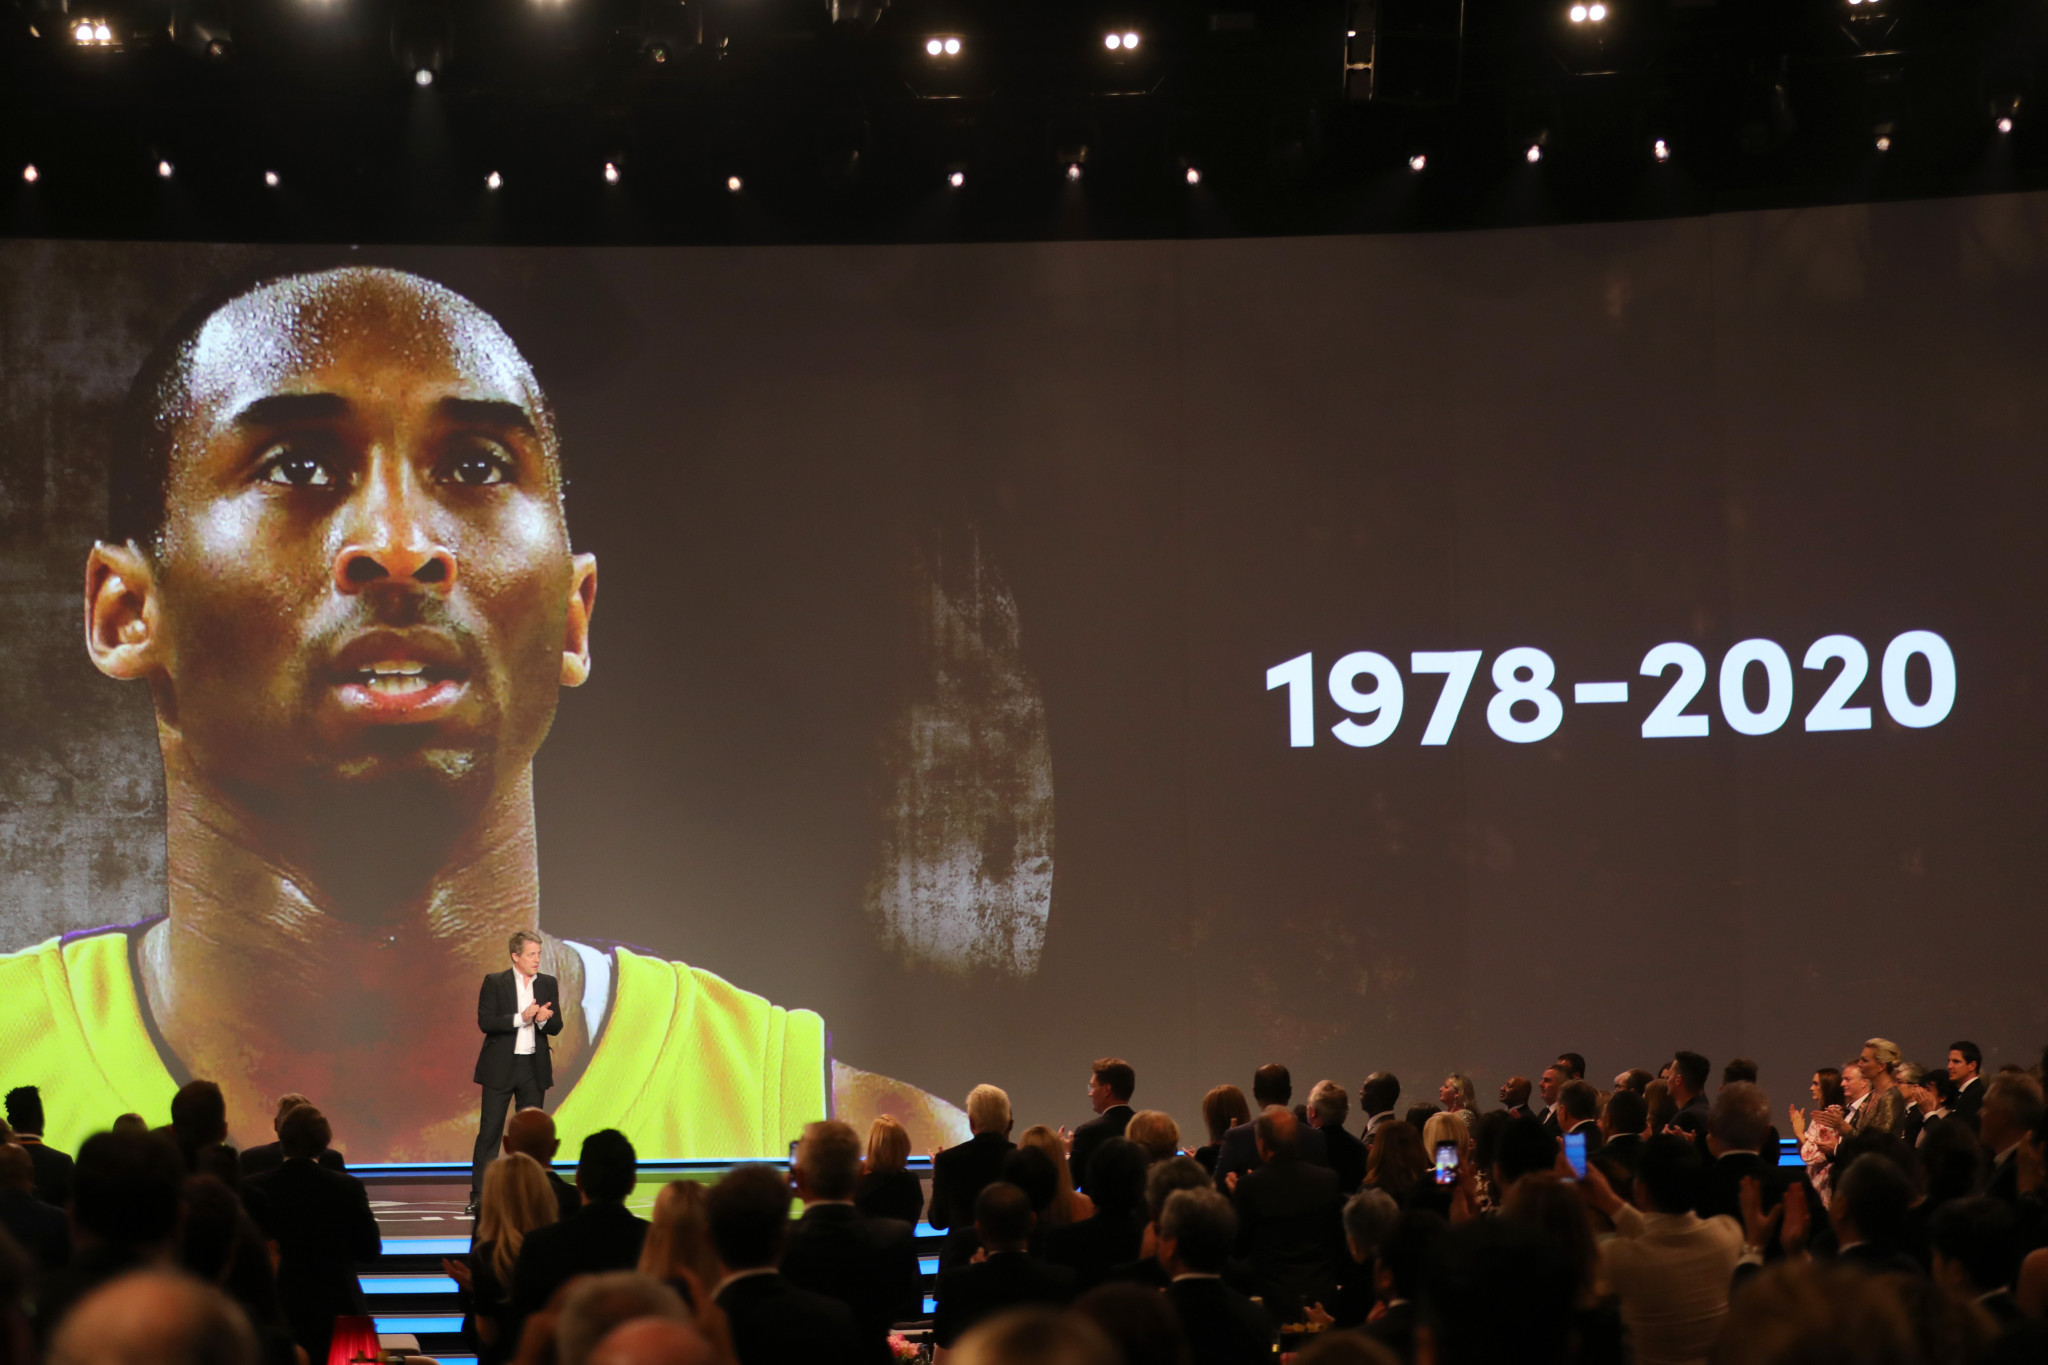 Bryant poised for posthumous entry into Basketball Hall of Fame